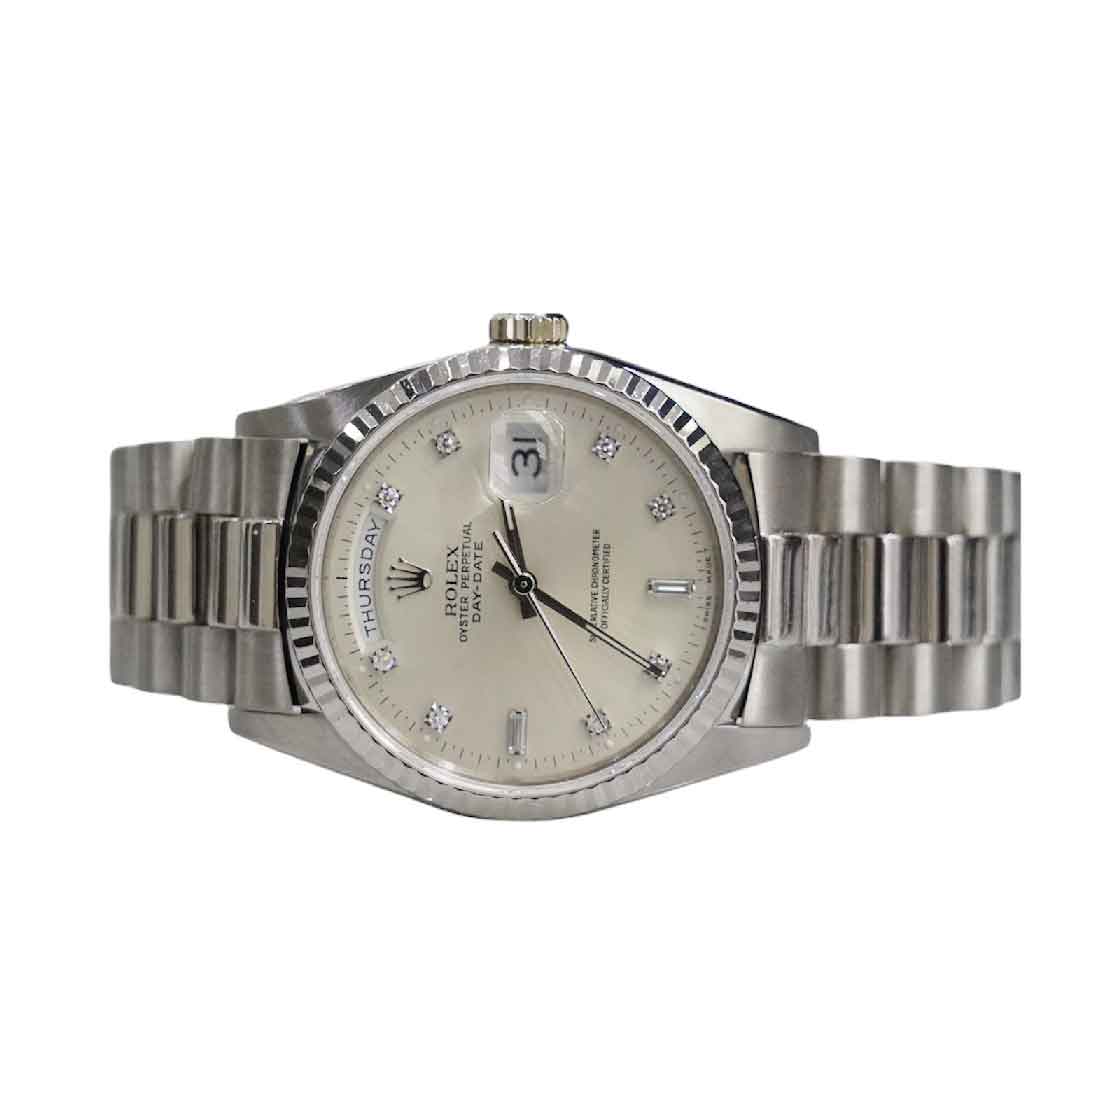 Rolex Day Date 36mm Watch 18239 Factory Diamond Dial 18k White Gold